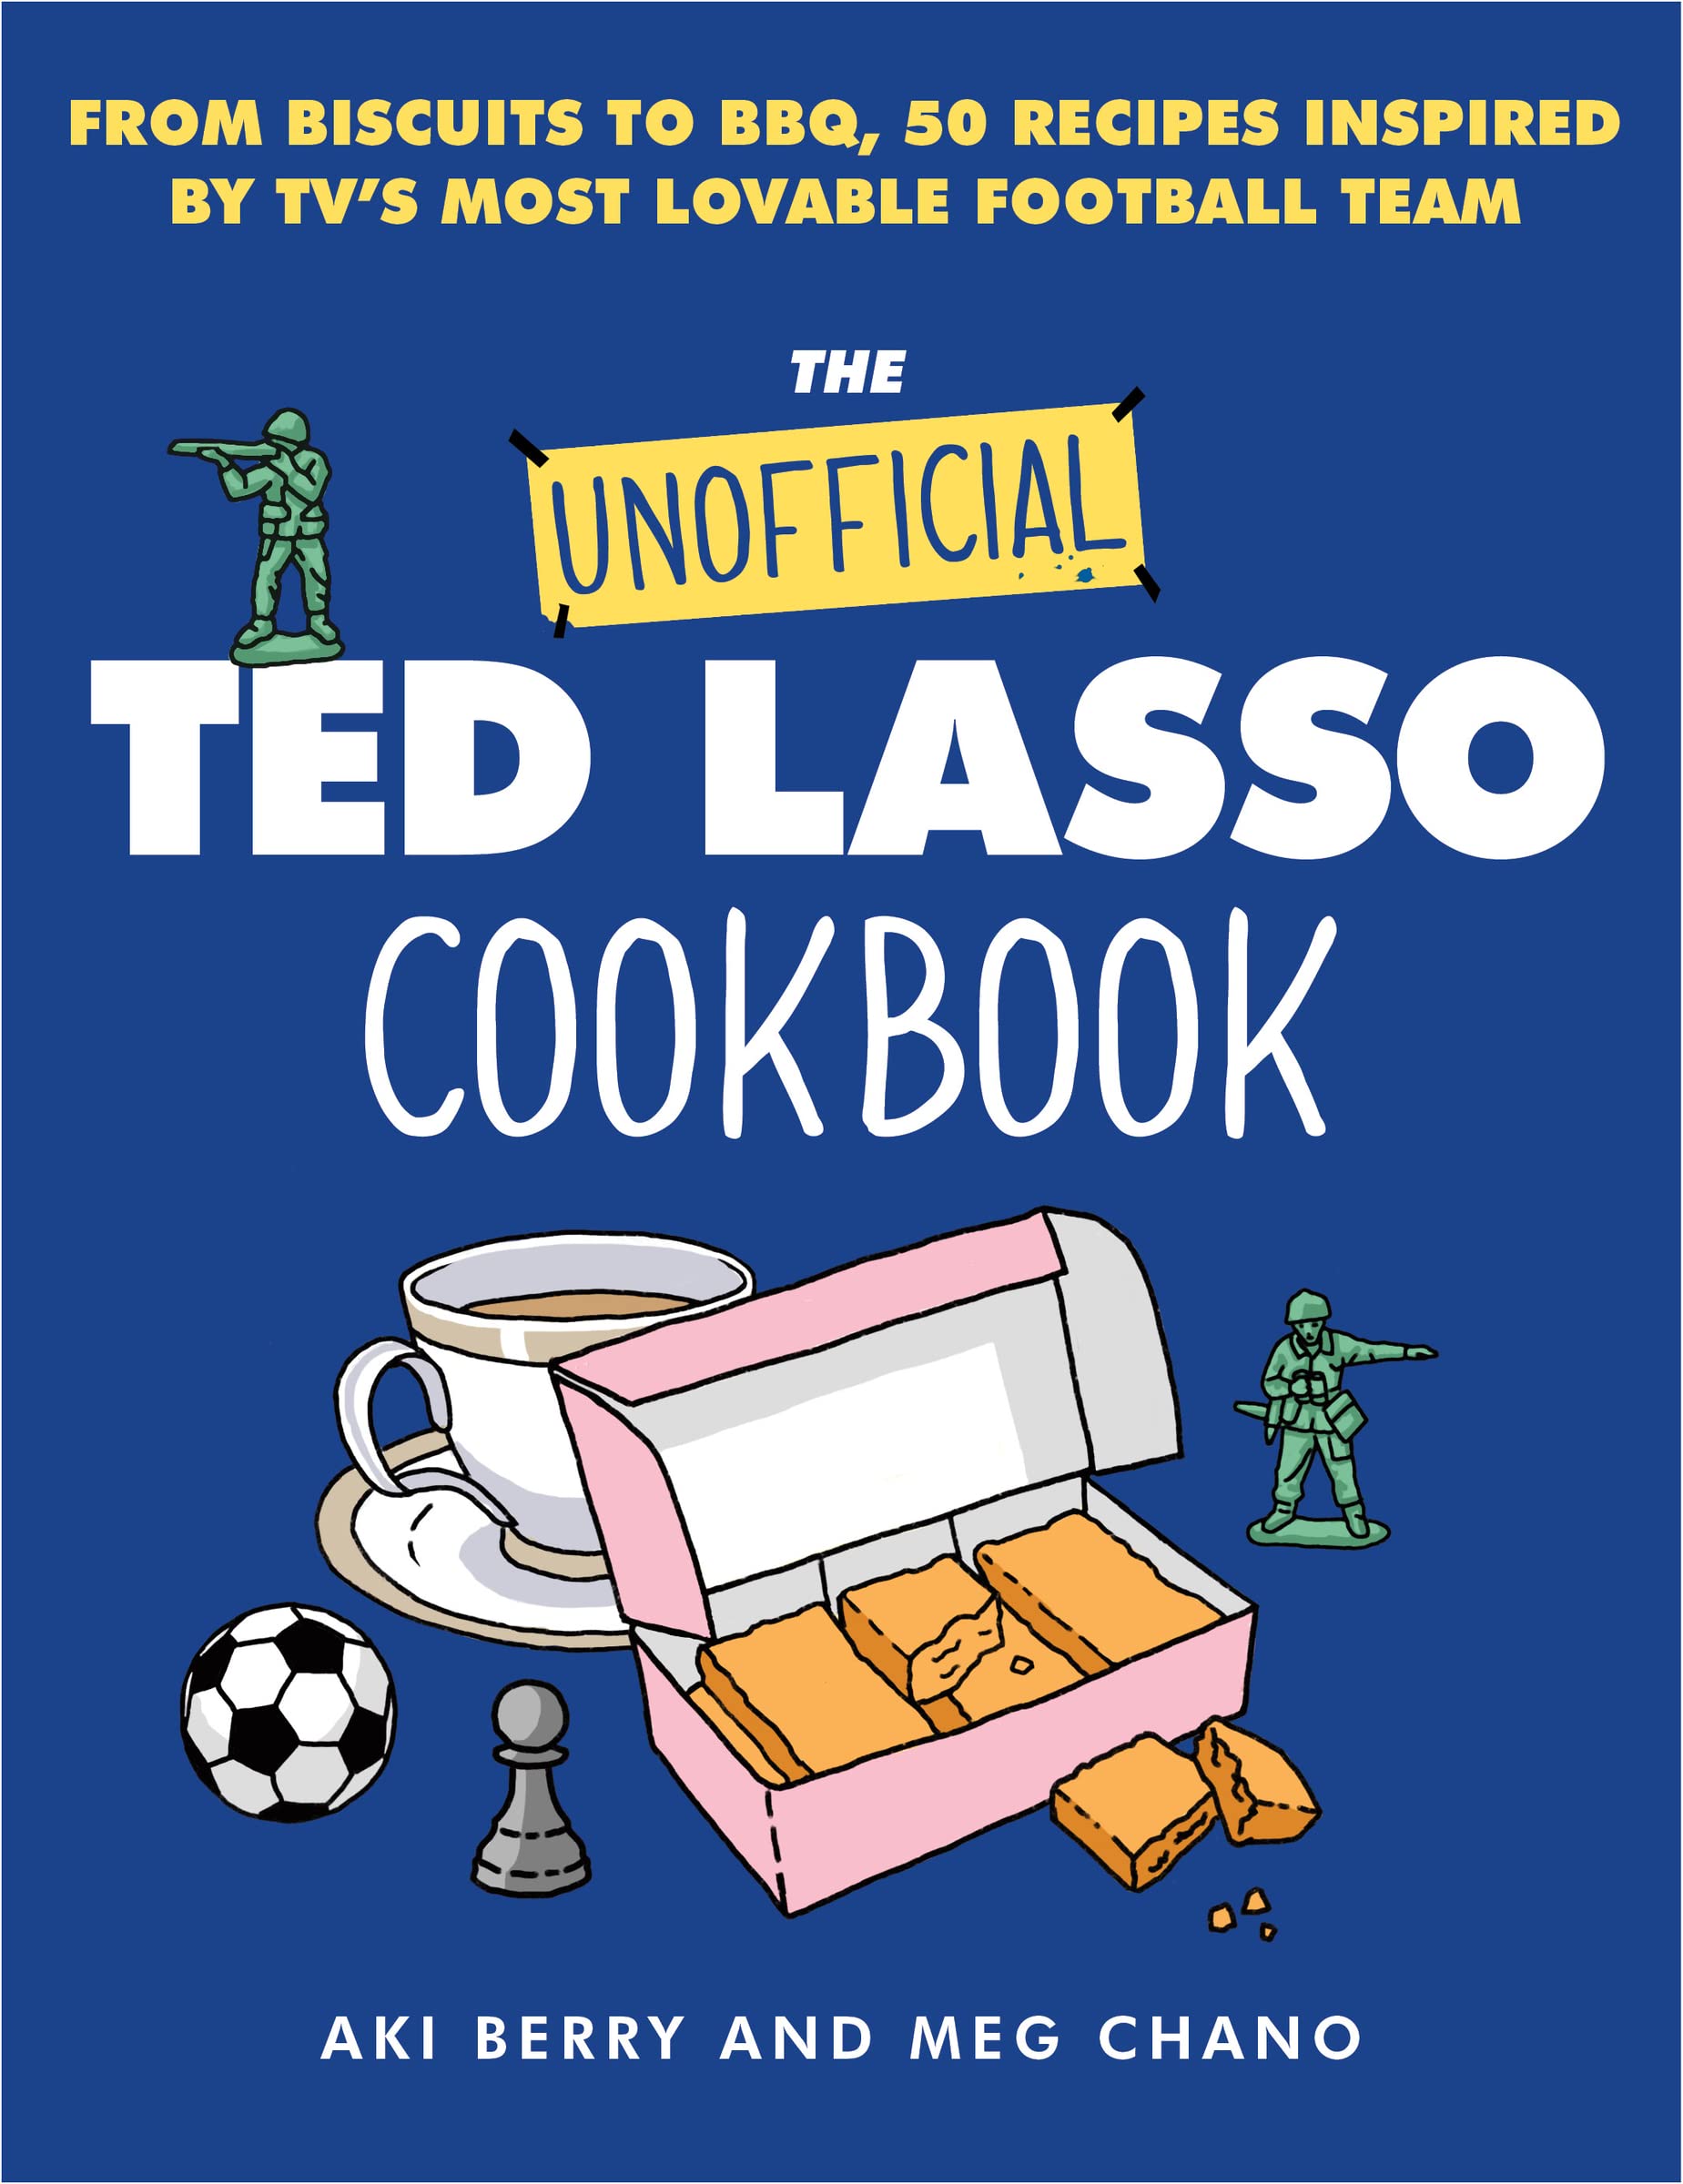 The Unofficial Ted Lasso Cookbook: From Biscuits to BBQ, 50 Recipes Inspired by TV's Most Lovable Football Team (Aki Berry, Meg Chano)